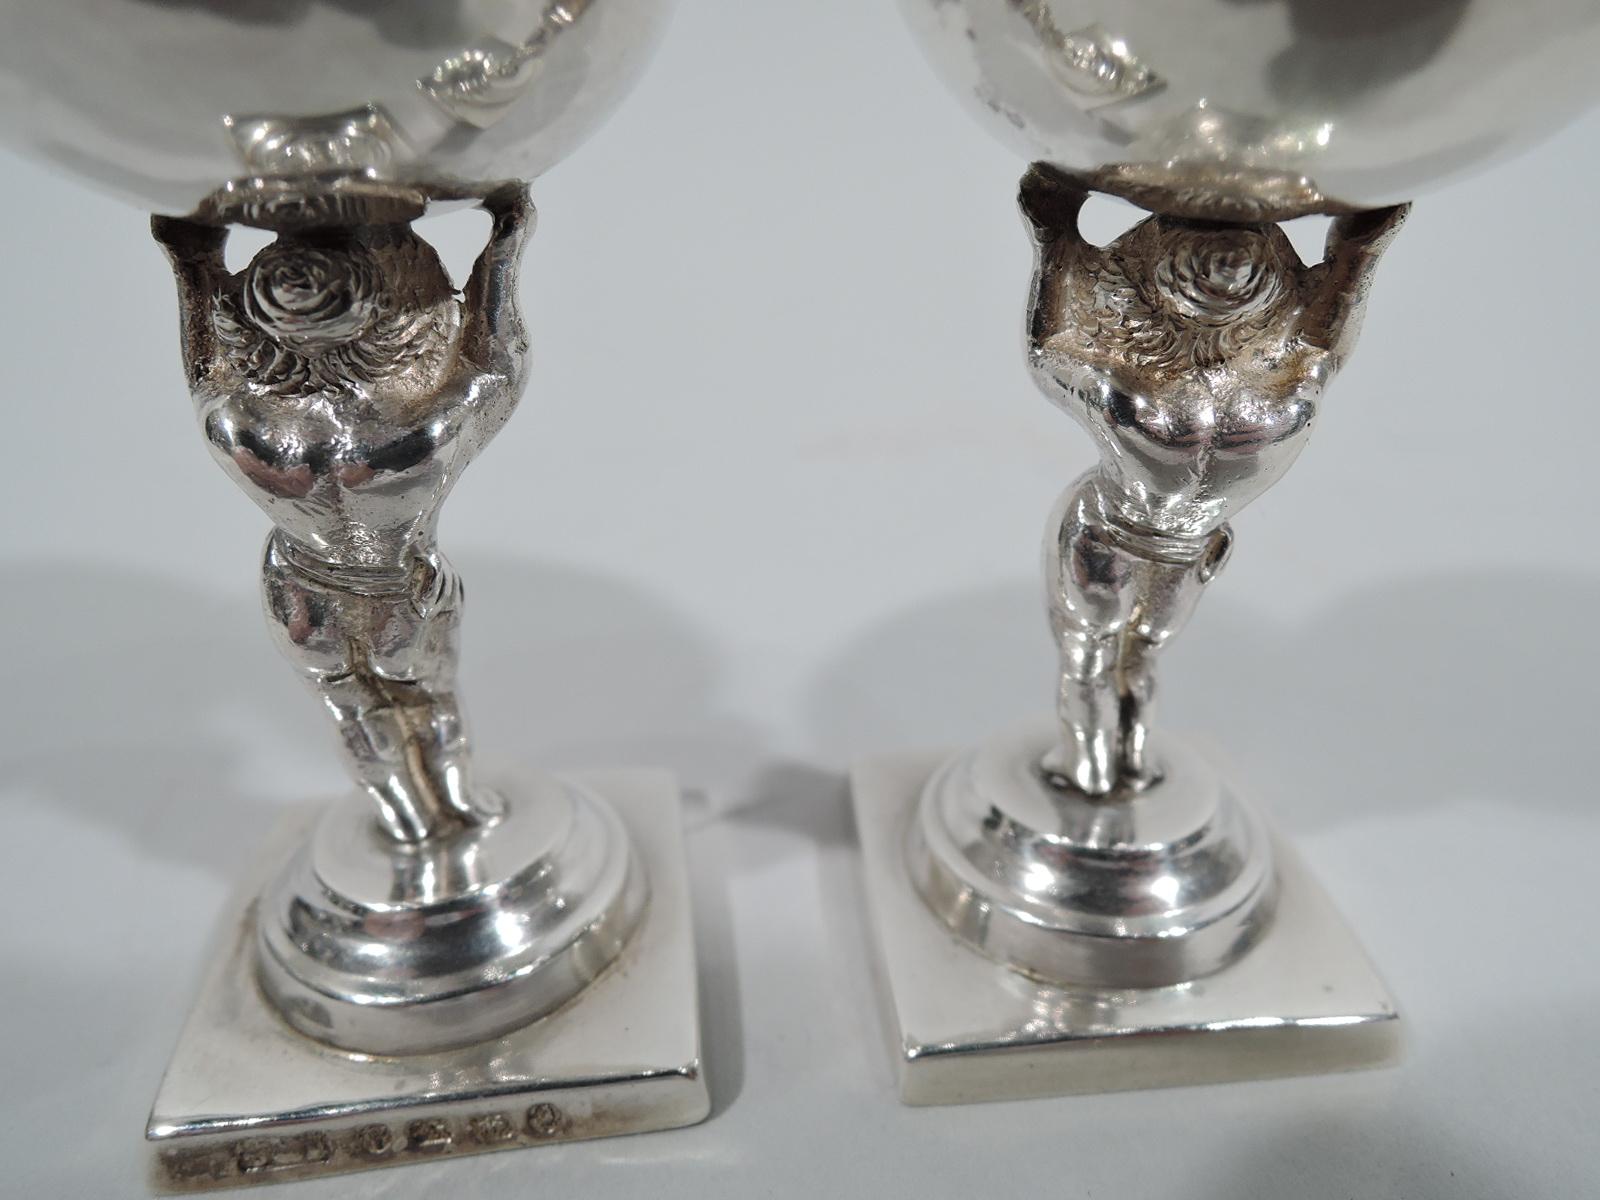 Pair of English Classical Sterling Silver Salt & Pepper Shakers 1